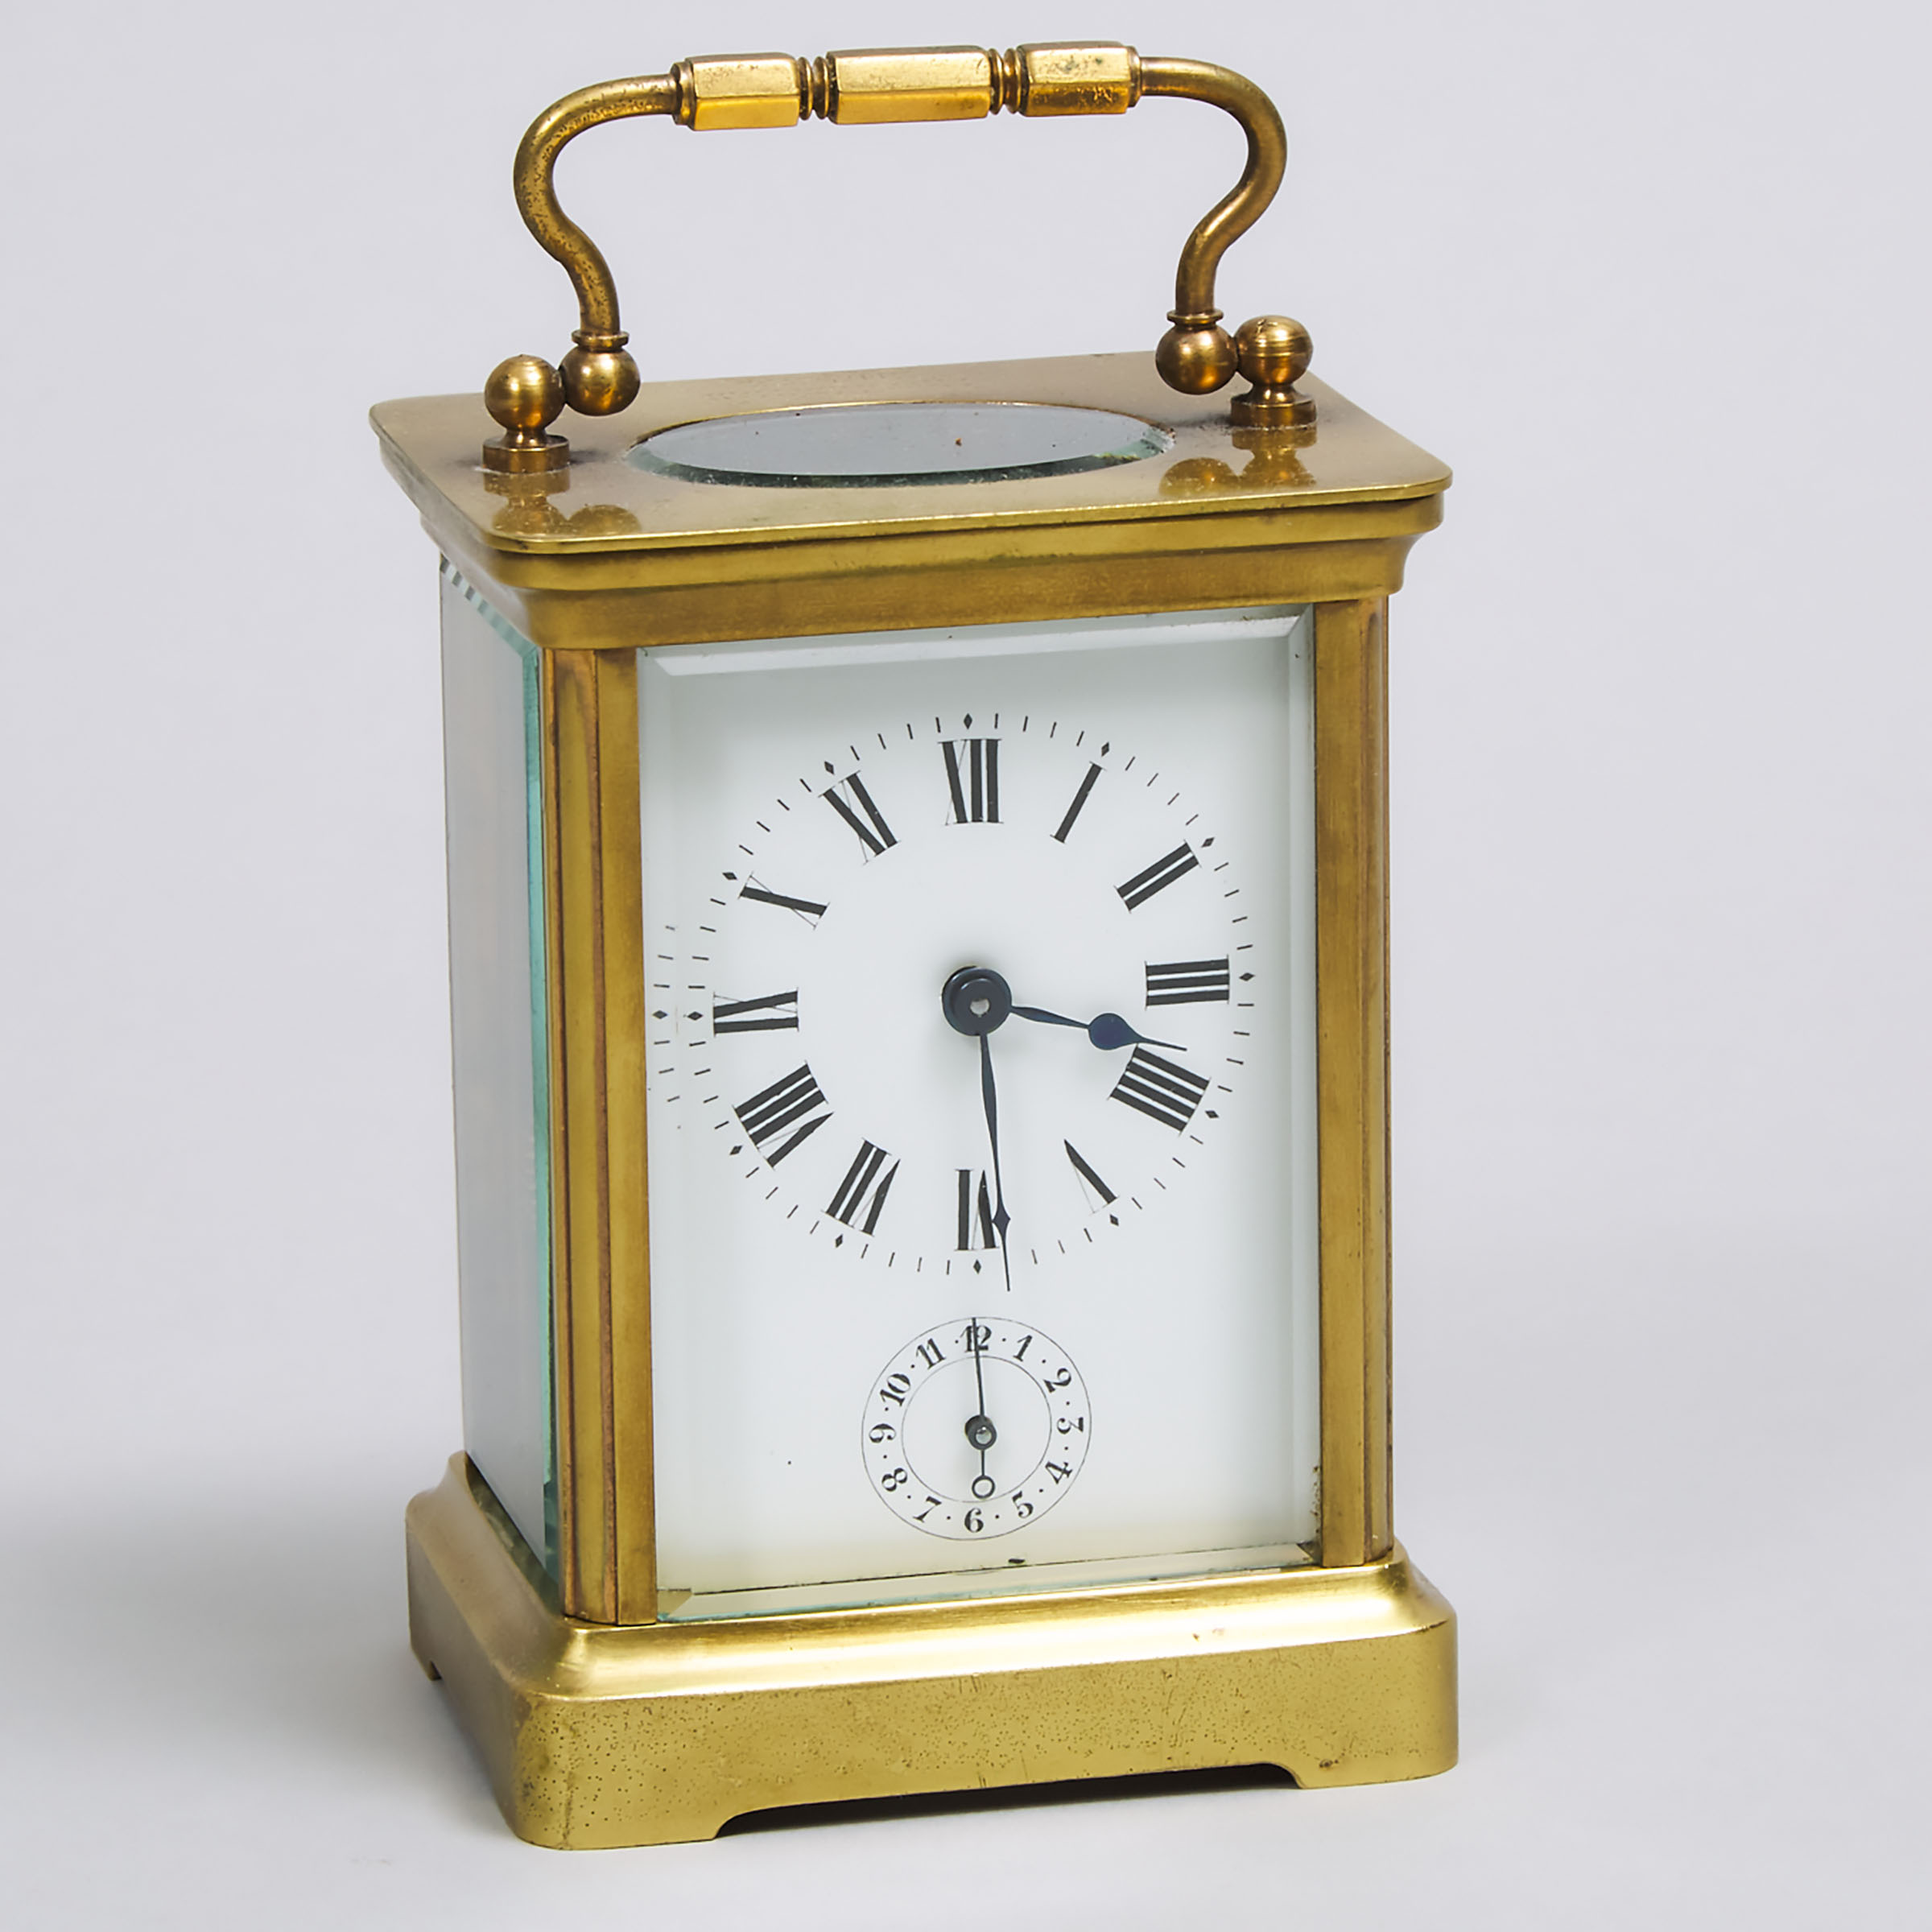 French Carriage Clock with Alarm, Duverdrey and Bloquel, Paris, c.1900